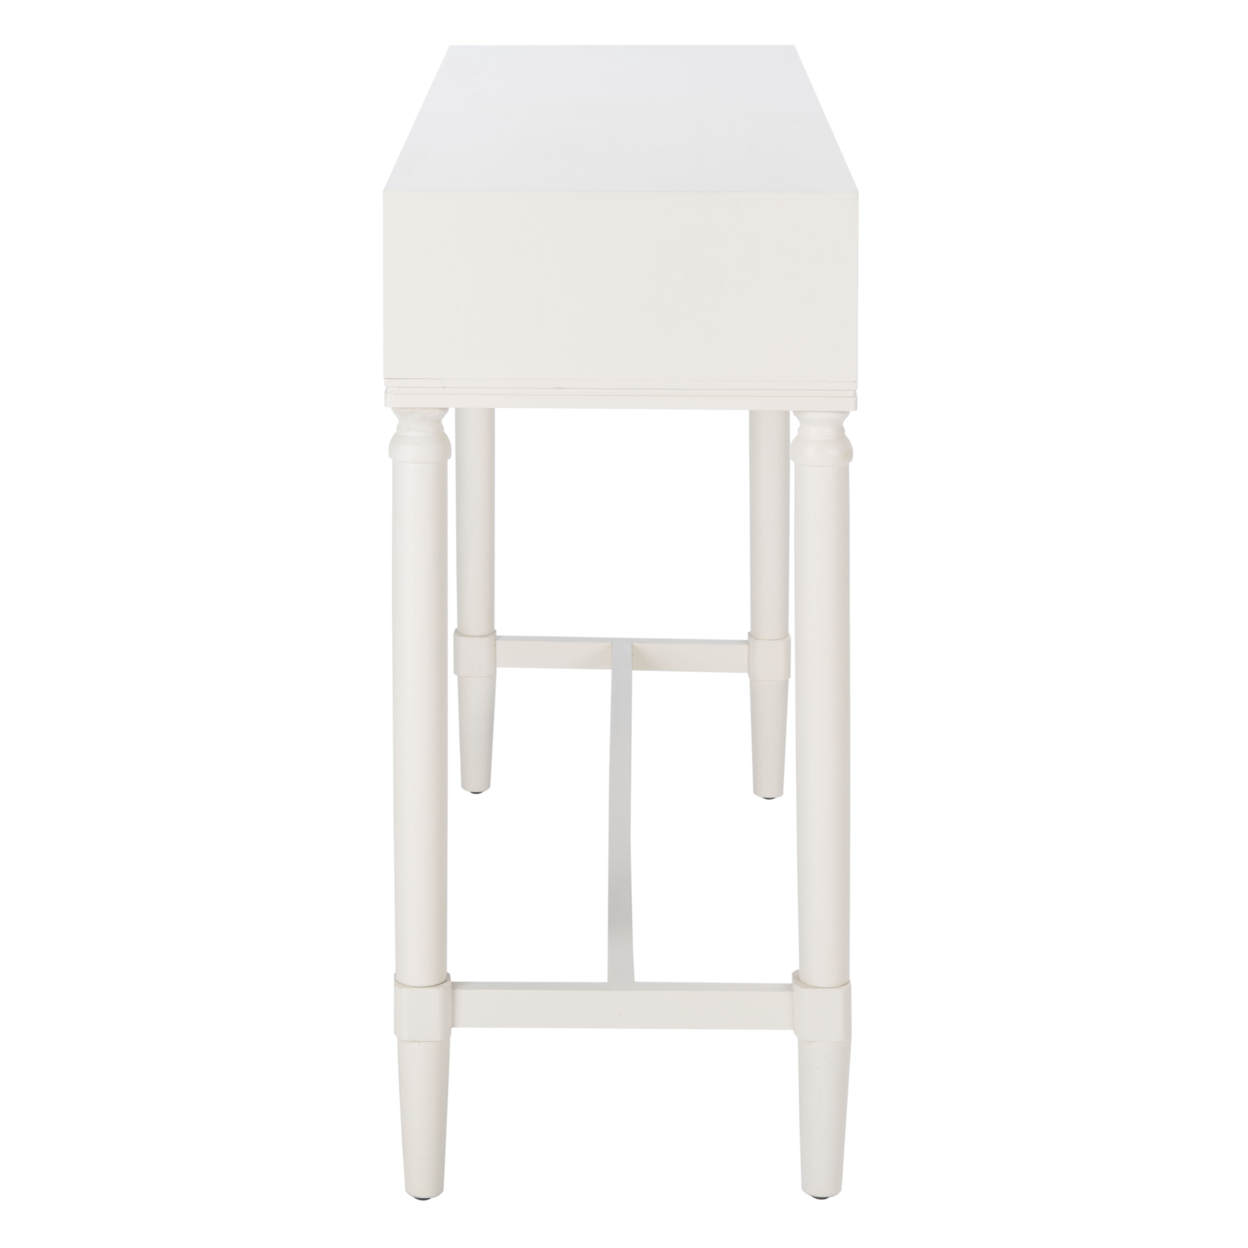 SAFAVIEH Aliyah 2-Drawer Console Table Distressed White